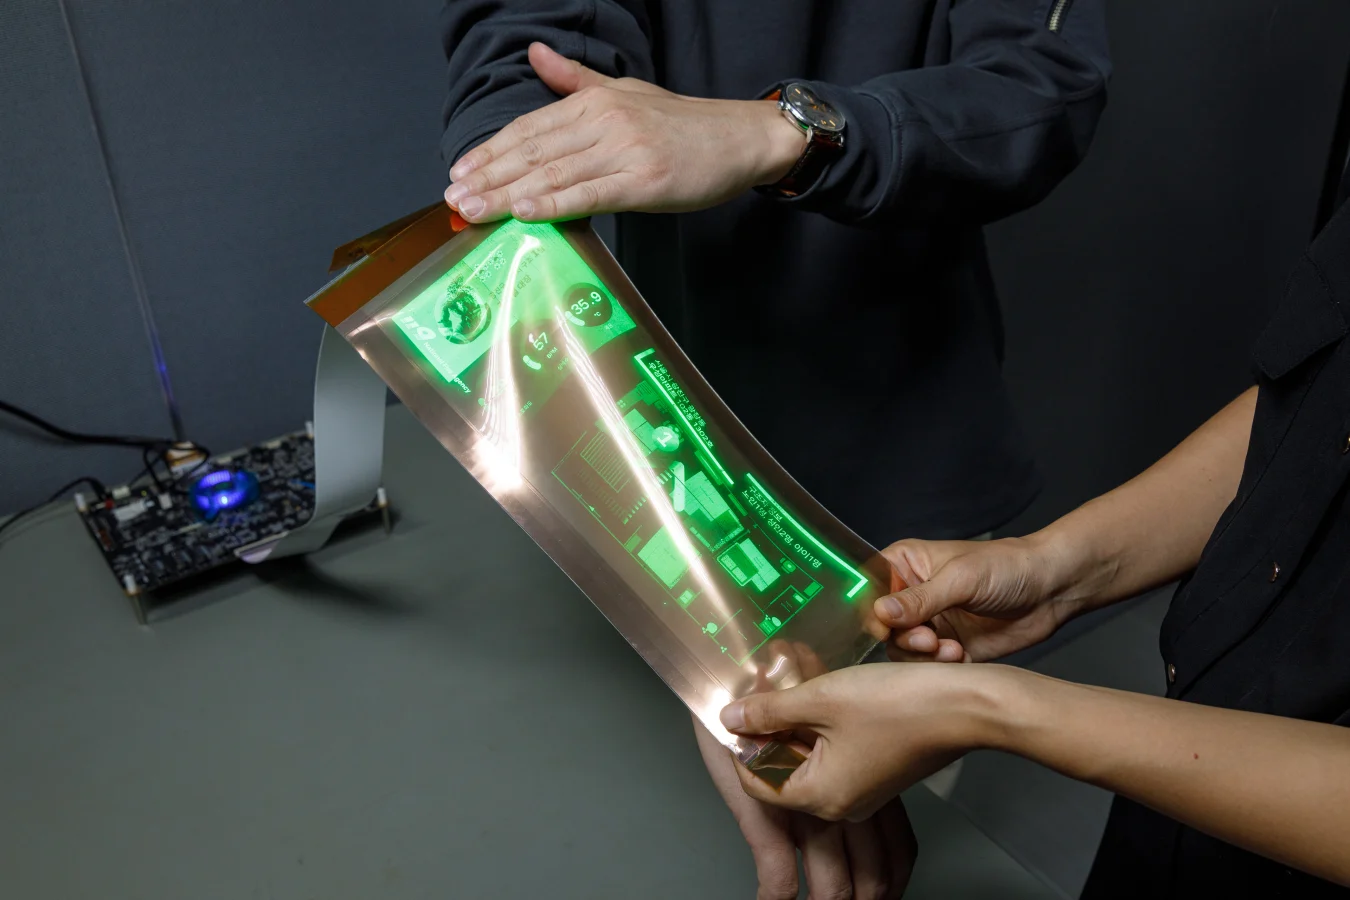 LG Disply has developed a 12-inch stretchable display that can be extended in size to 14 inches, the company announced.